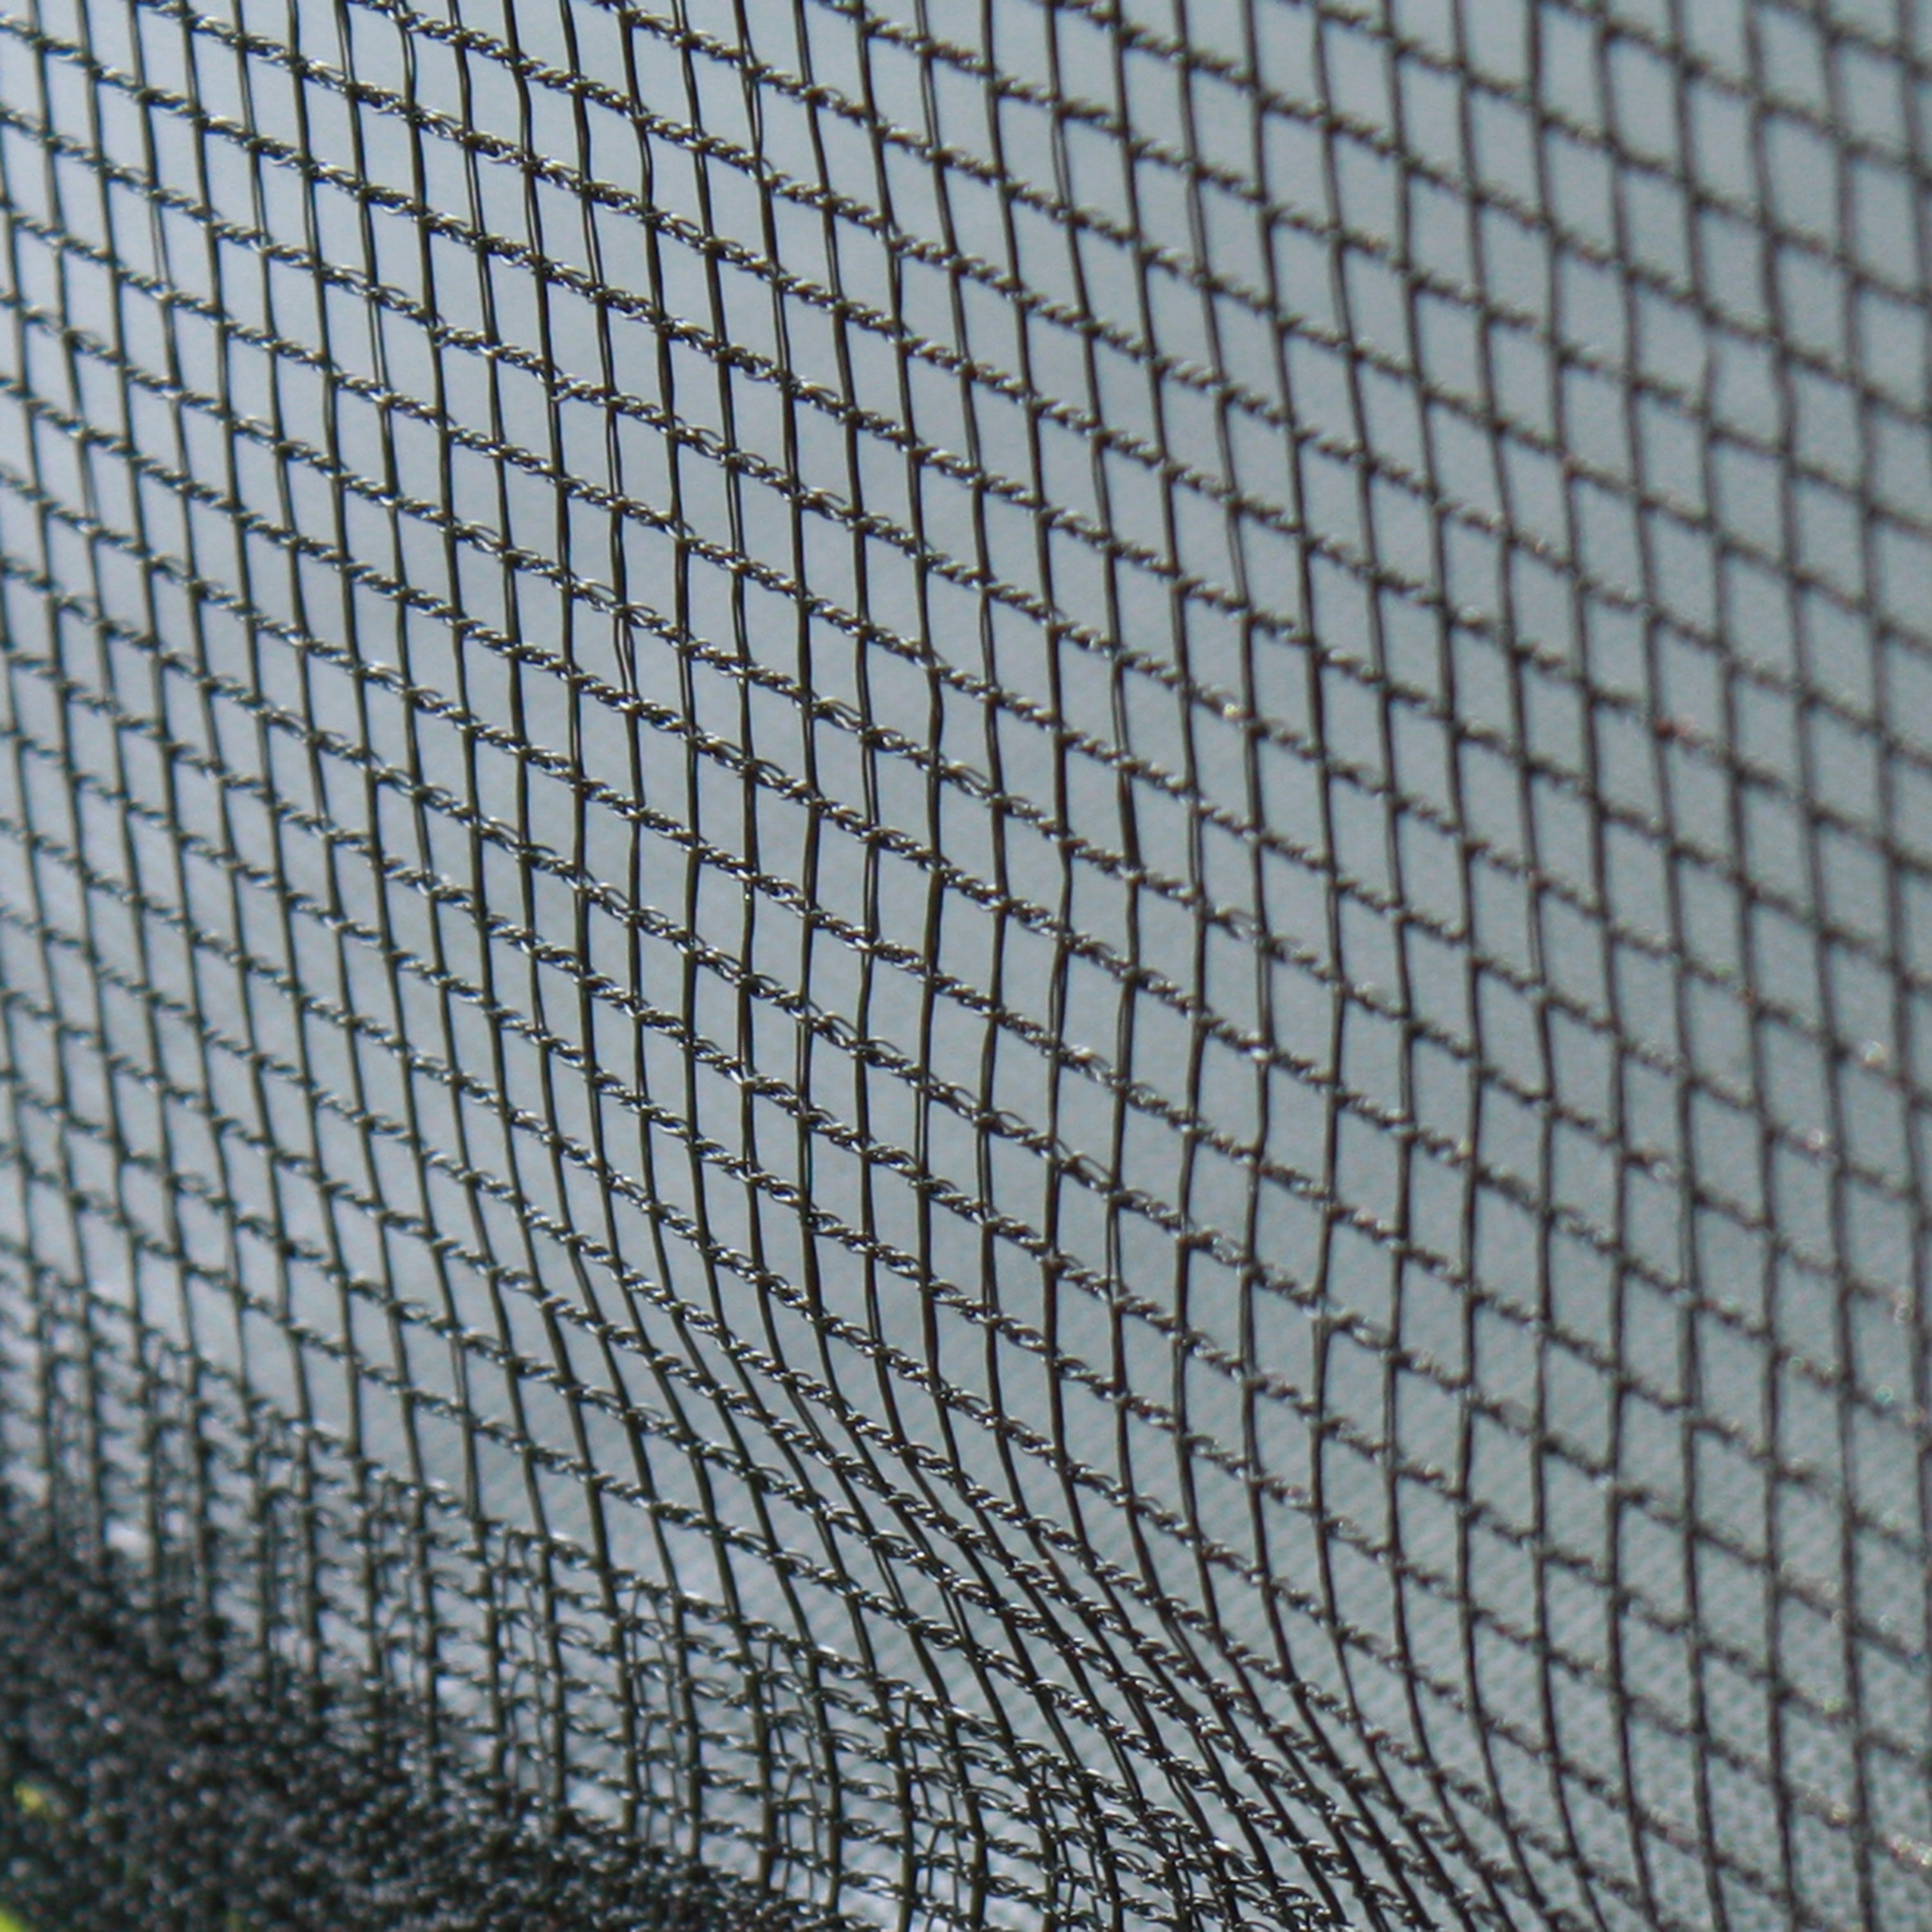 The polyethylene net is tightly woven to prevent any kids from poking through the holes. 